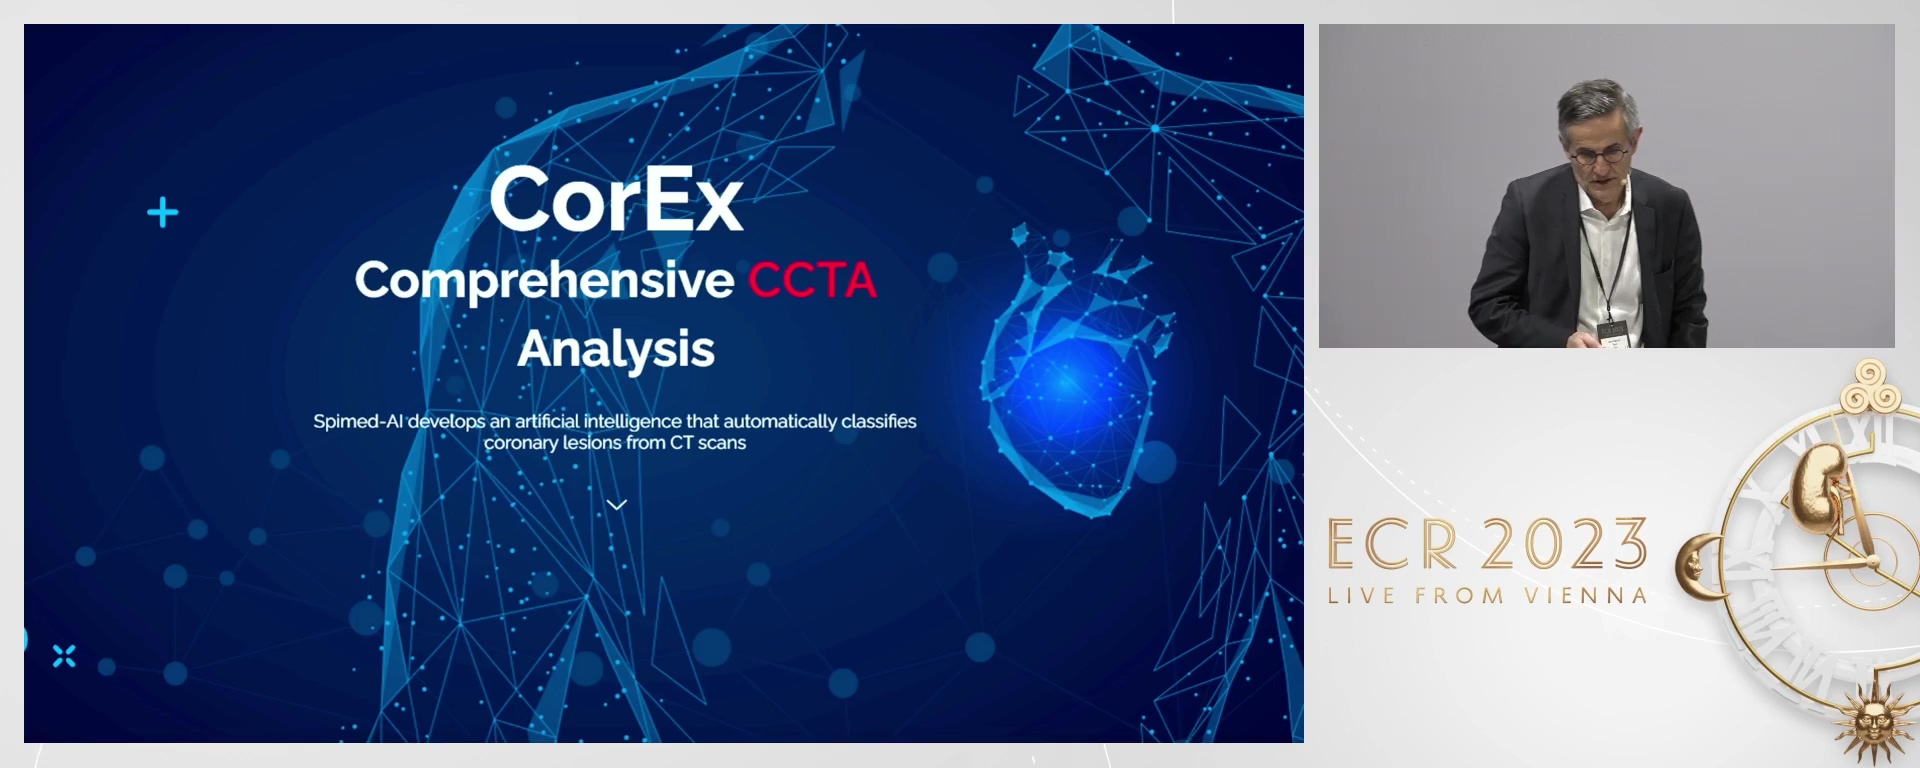 CorEx: a Comprehensive CCTA Analysis using multiple Deep Learning Models